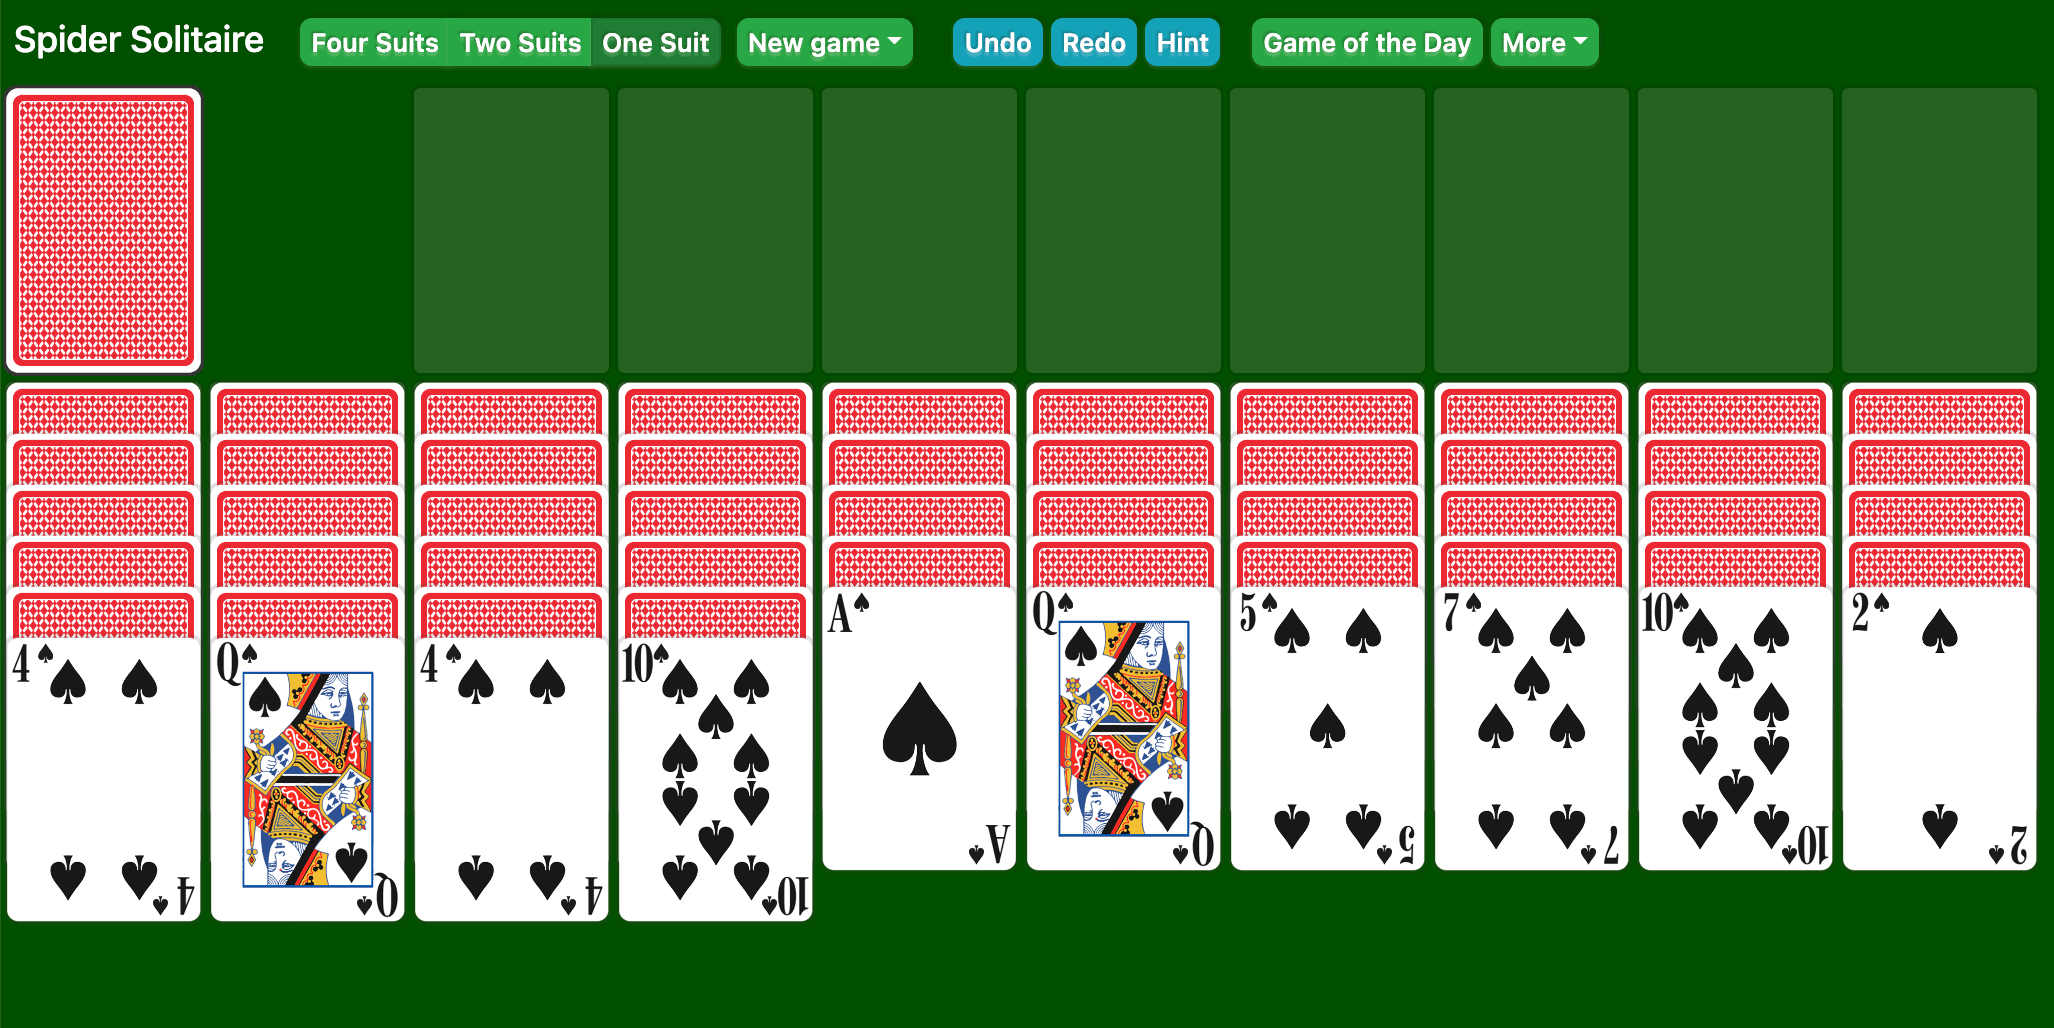 spider solitaire 2 suit rules